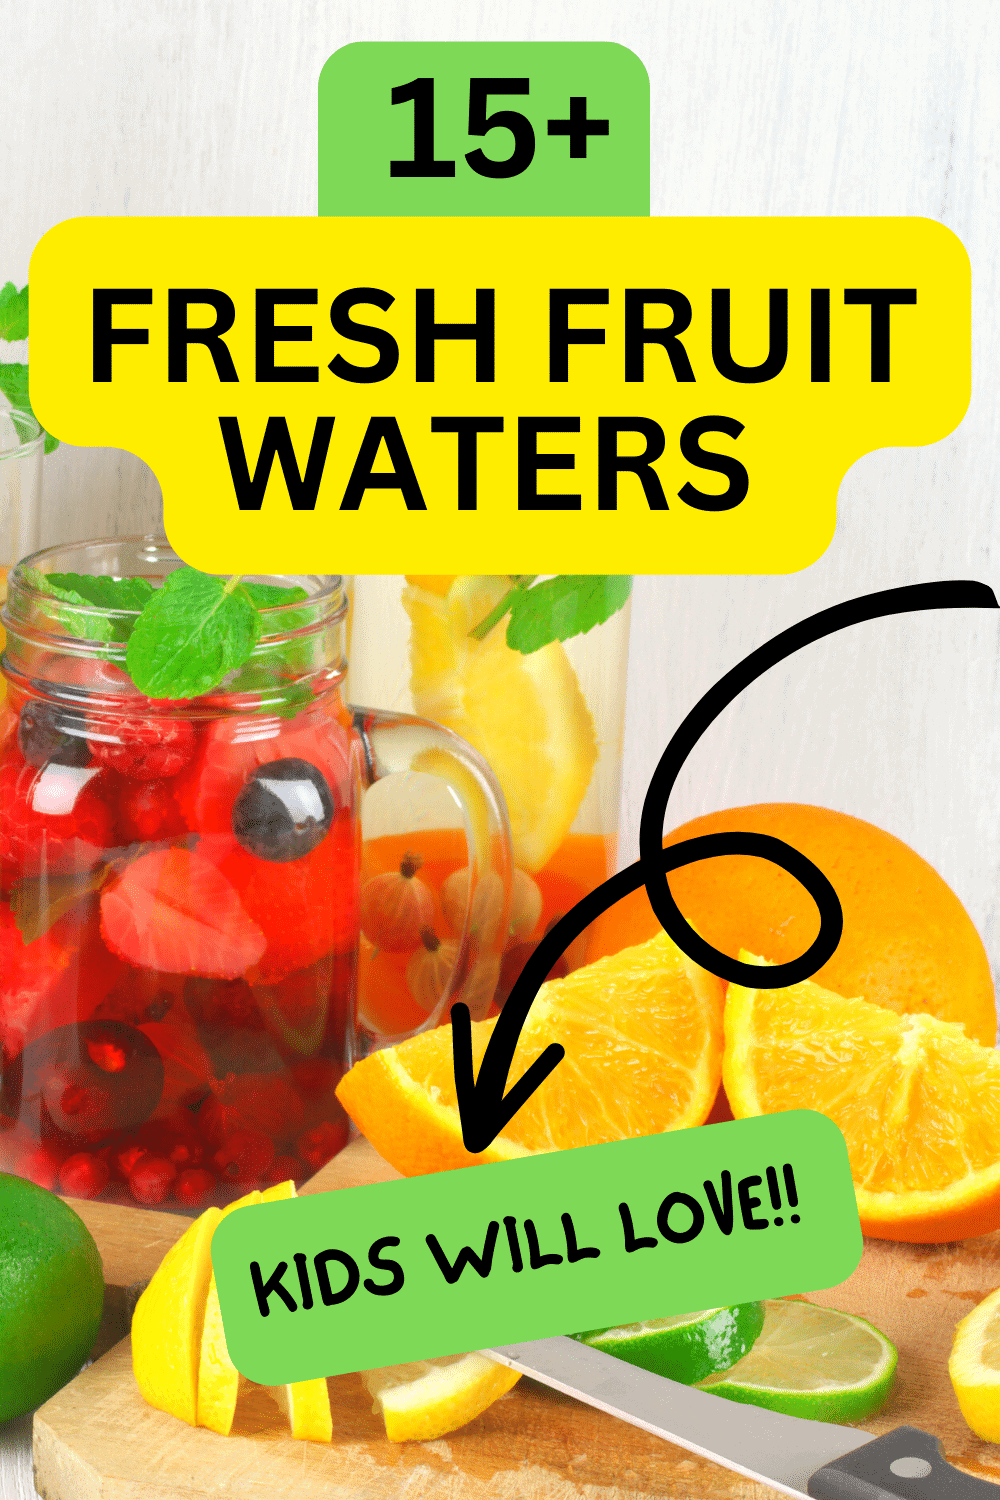 Fruit Water Recipe Ideas (fruits infused water kids love!) TEXT OVER IMAGES OF FRUIT INFUSED WATERS WITH FRESH FRUIT